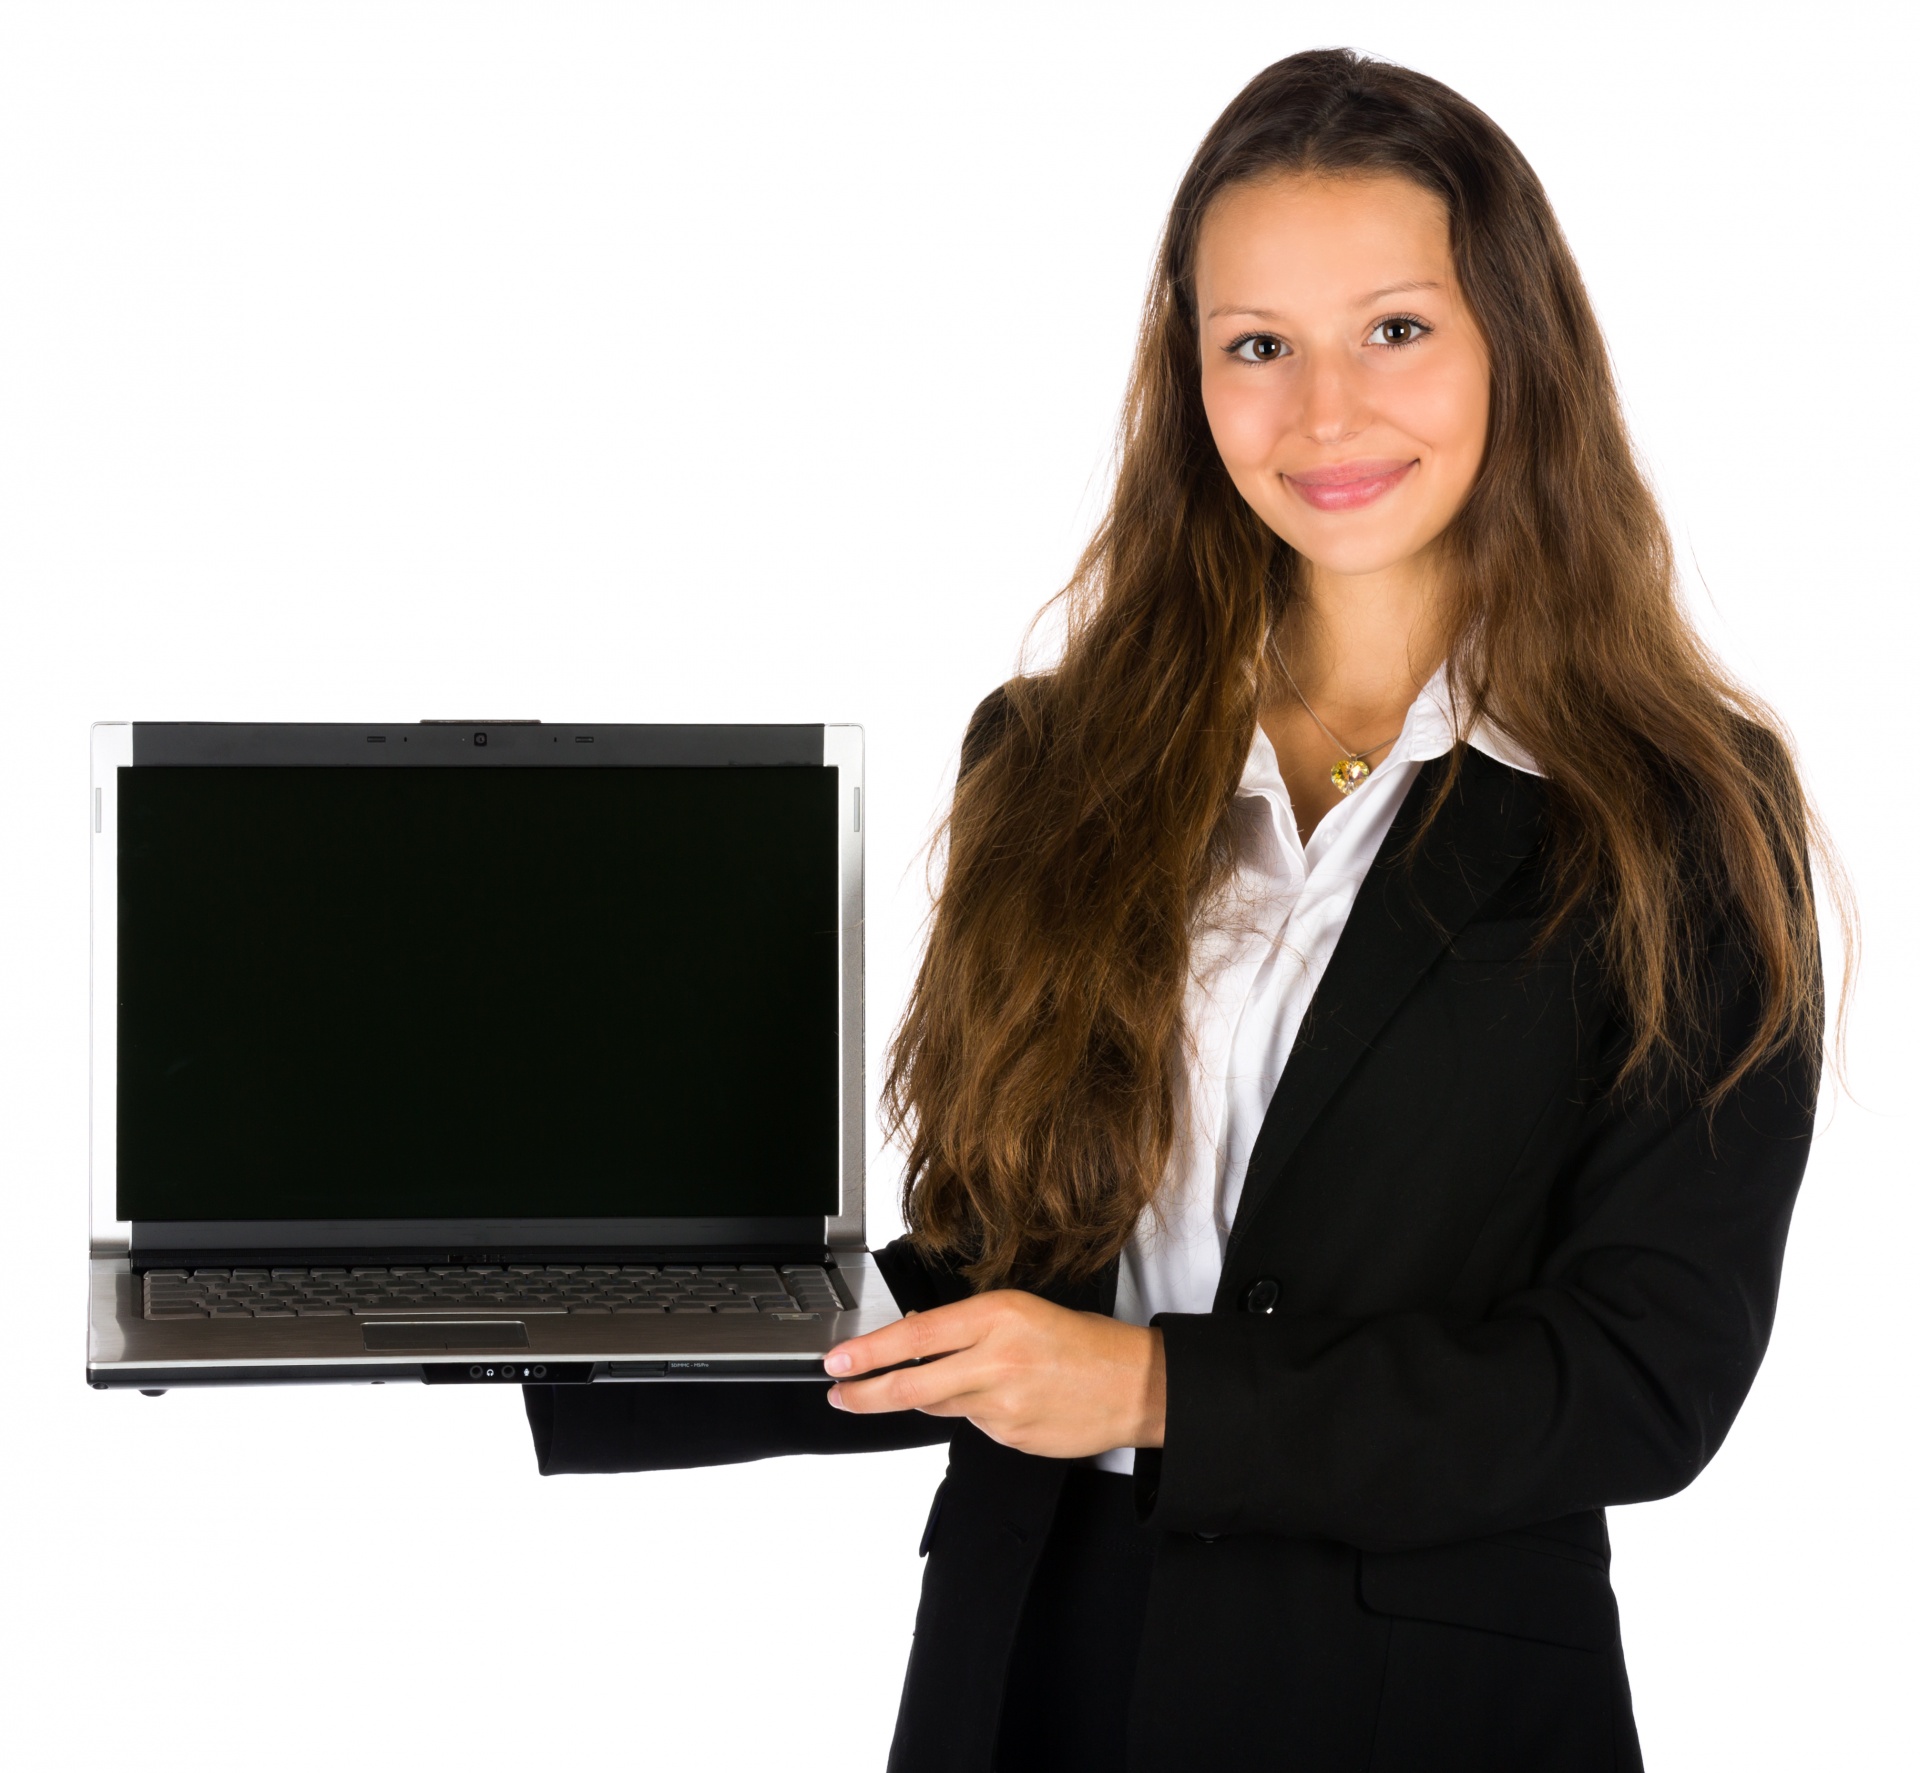 Young busineswoman holding a laptop